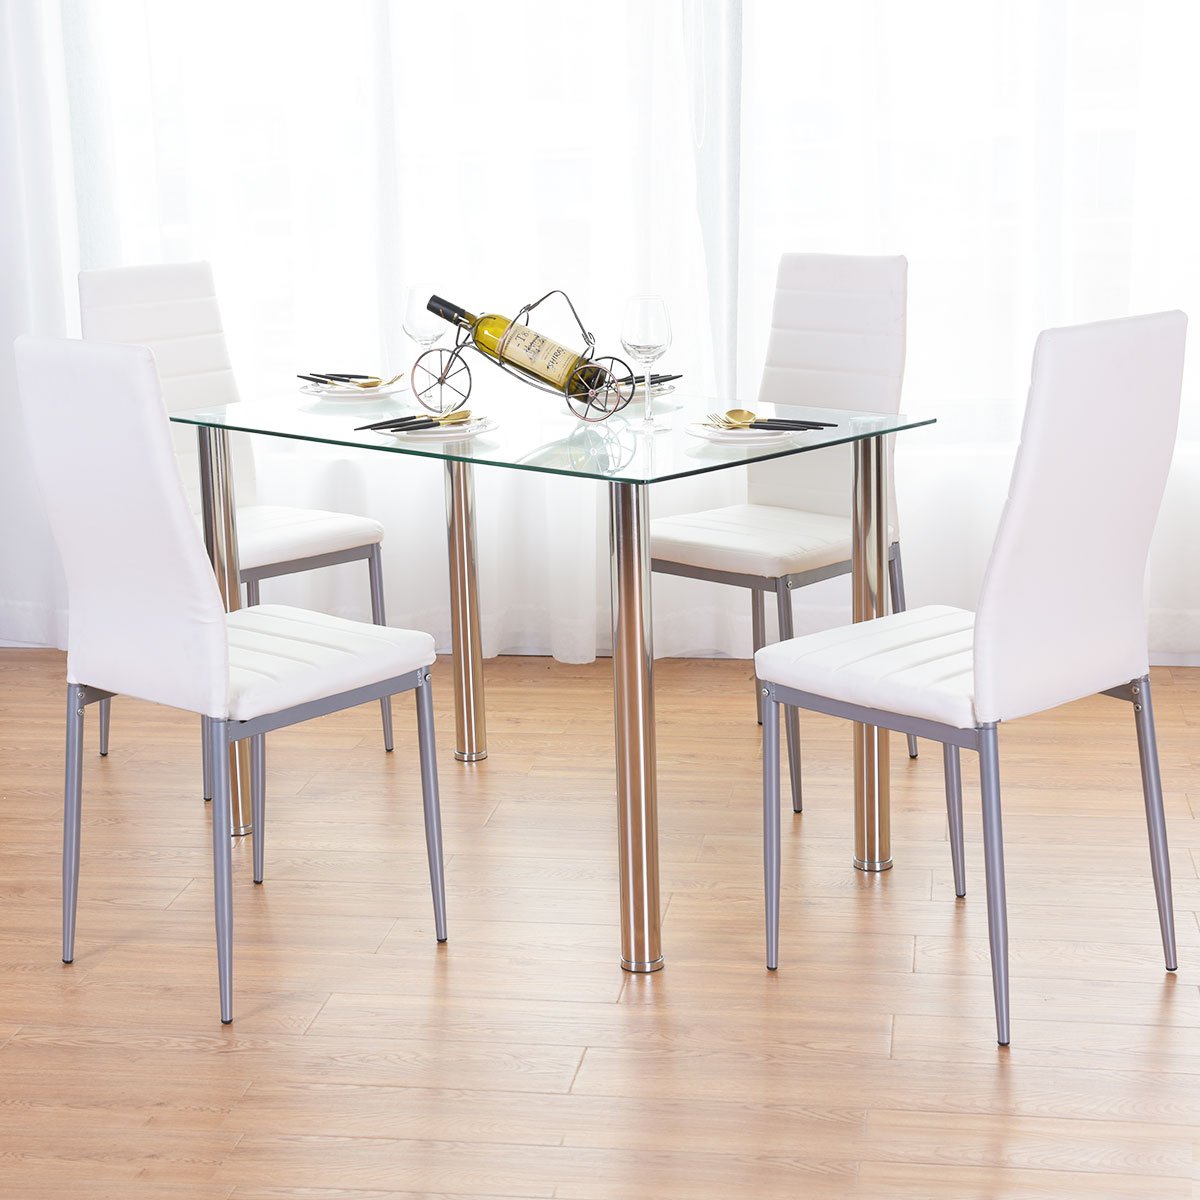 Zimtown 5 Piece Dining Table Set White 4 Chair Glass Metal Kitchen Dining Room Breakfast - image 4 of 9